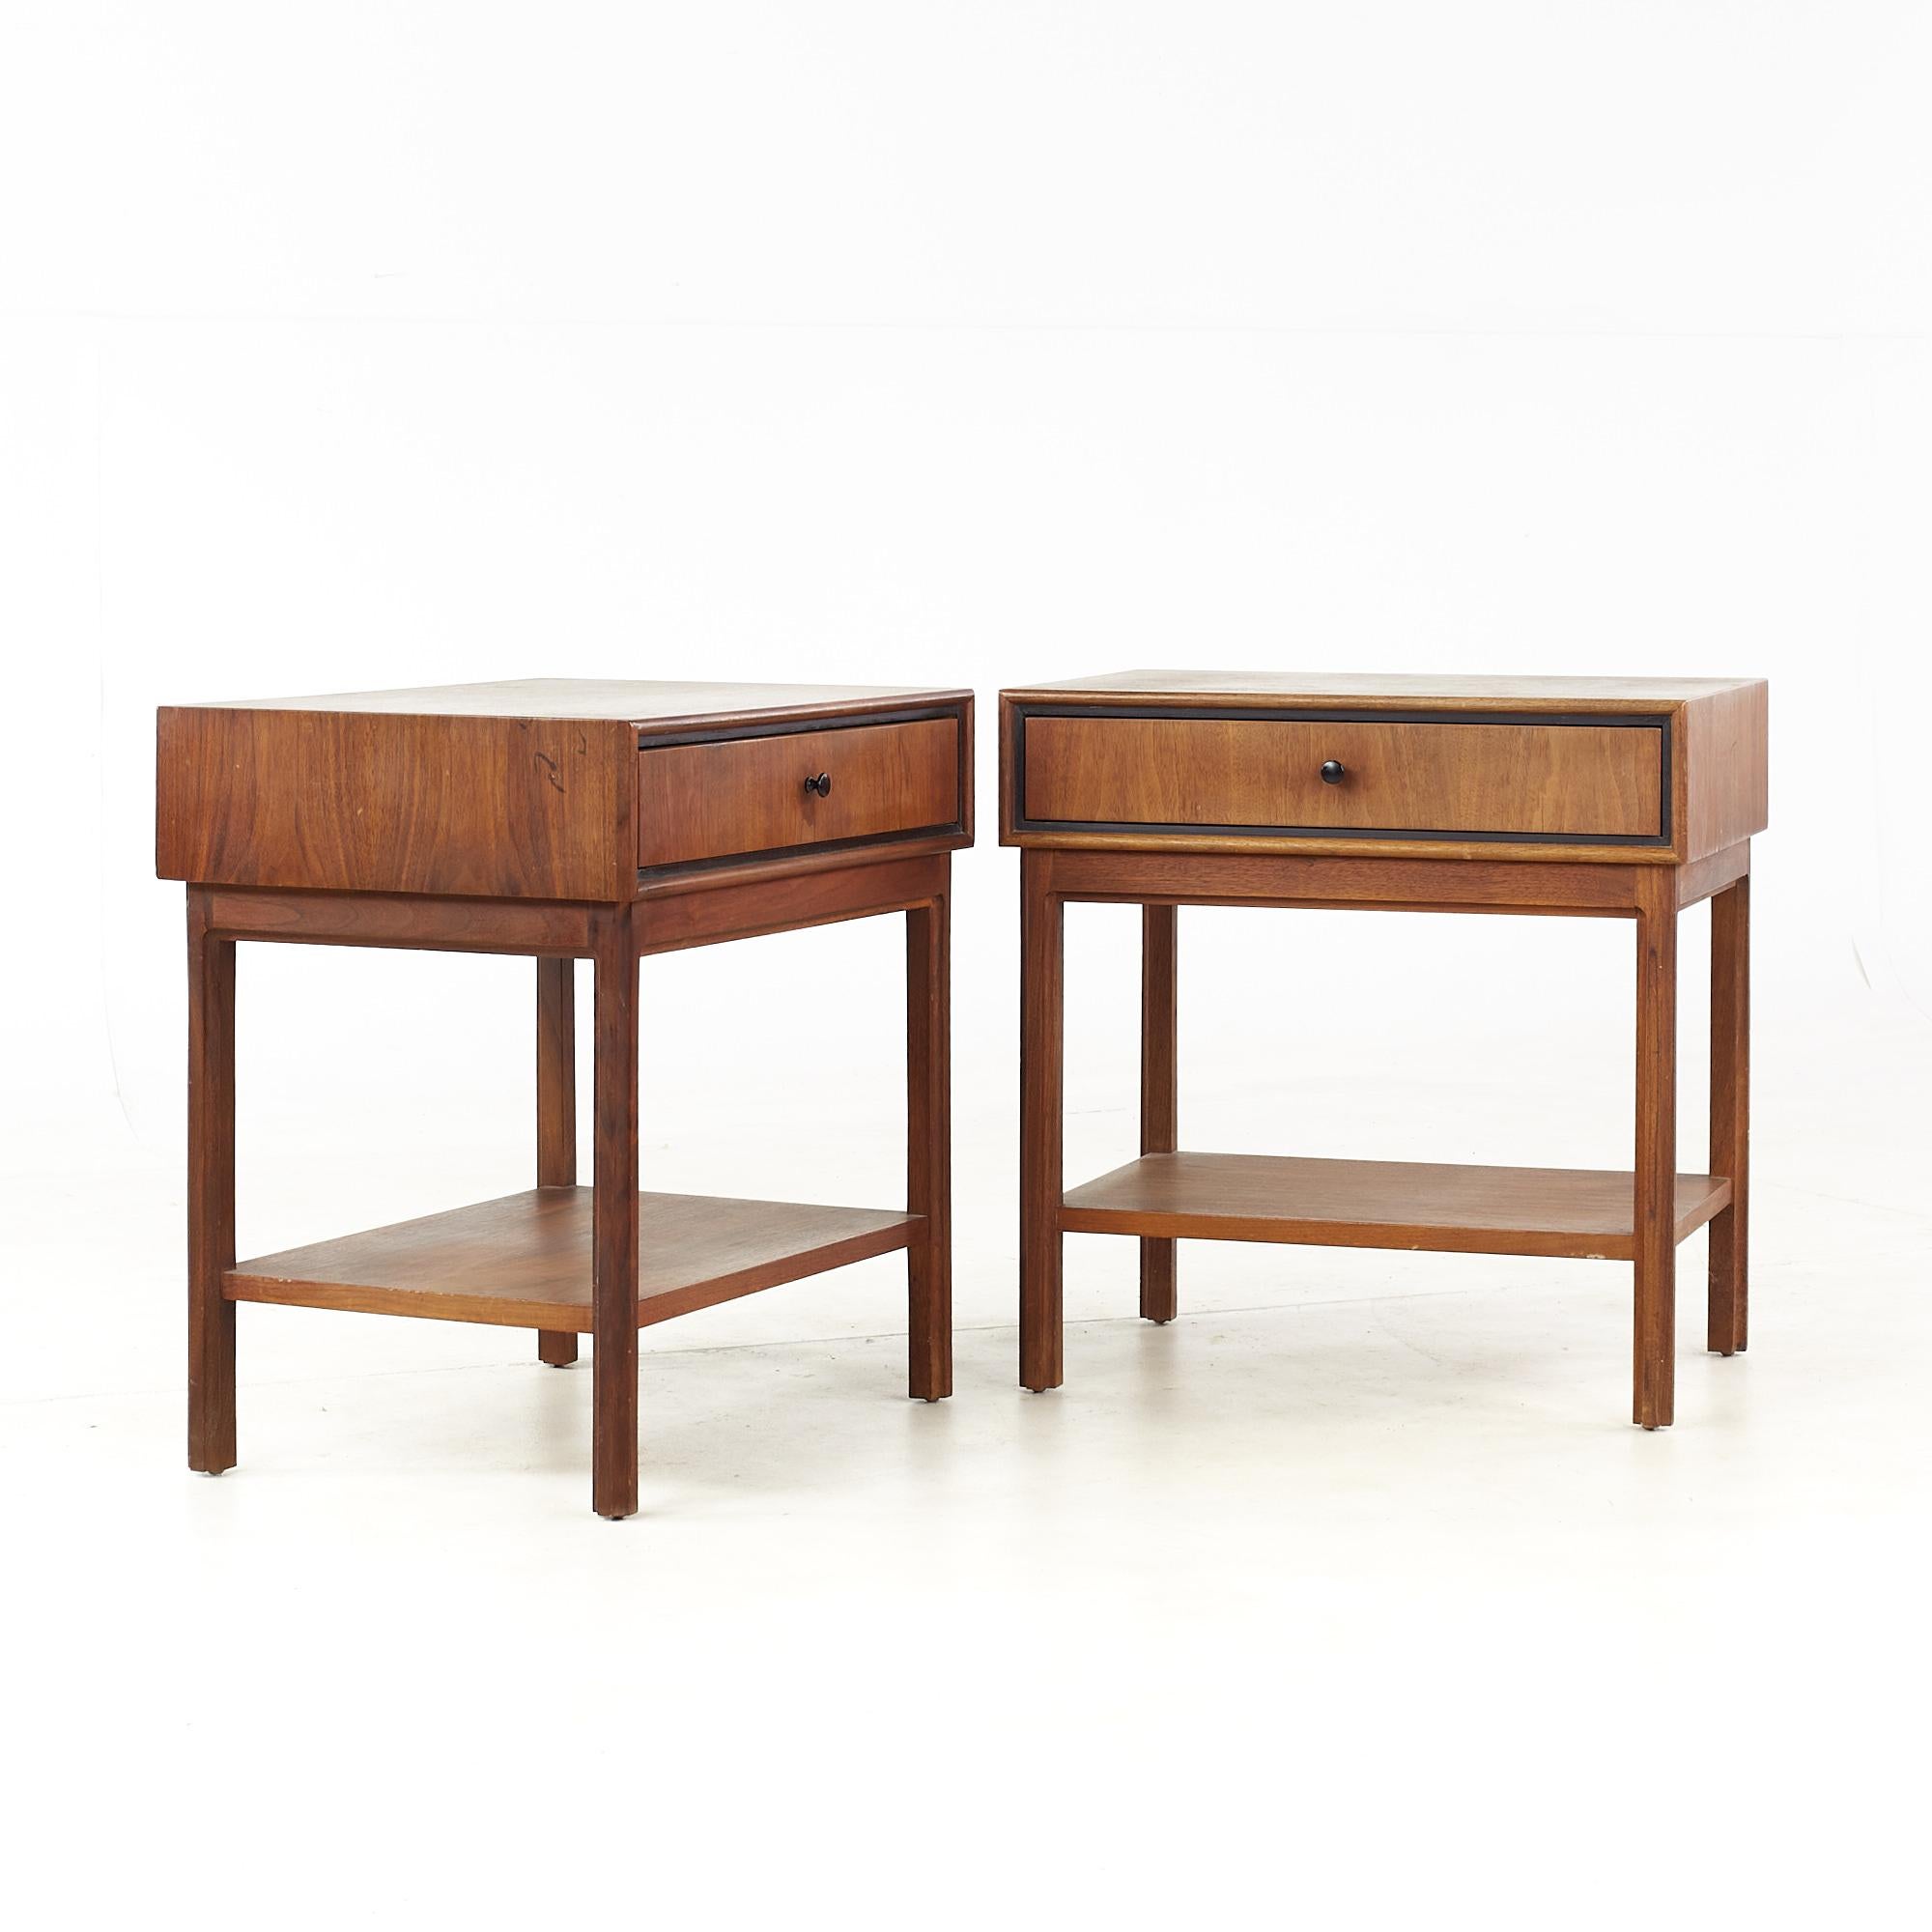 Jack Cartwright for Founders Mid Century nightstands - pair

Each nightstand measures: 22 wide x 16.75 deep x 22.5 inches high

All pieces of furniture can be had in what we call restored vintage condition. That means the piece is restored upon